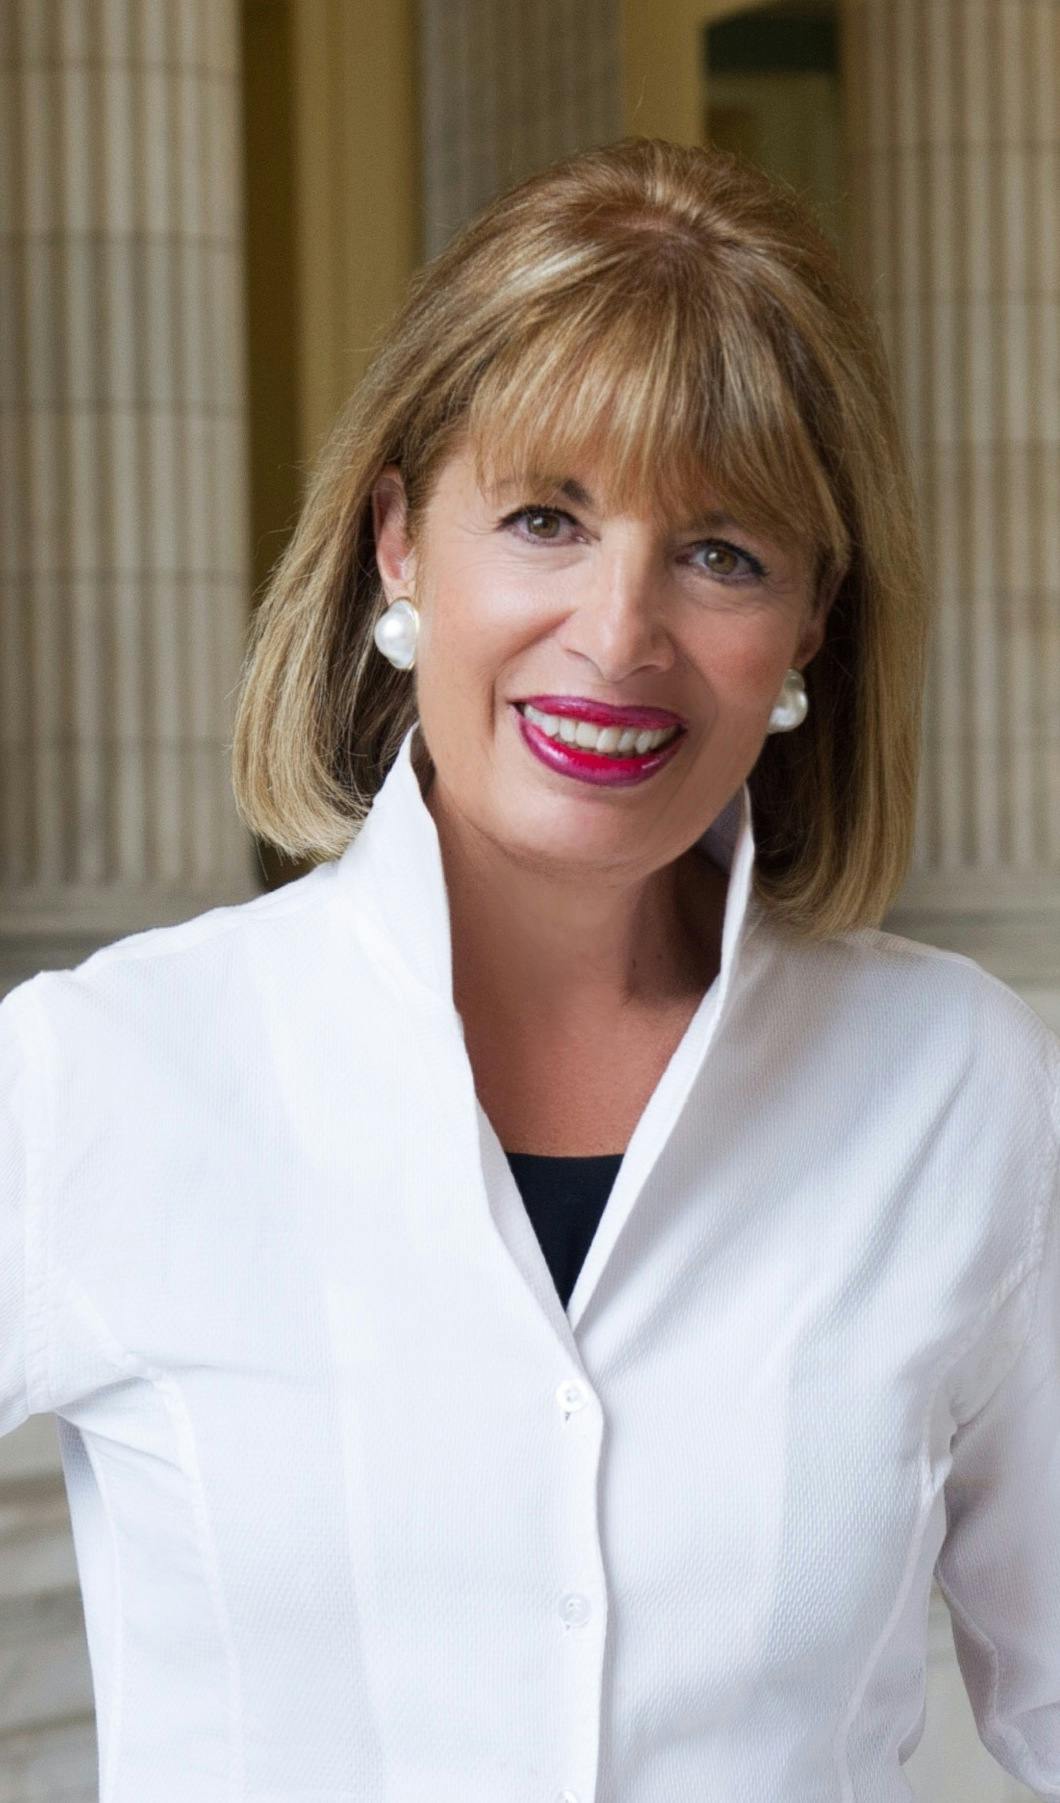 Profile picture of Jackie Speier